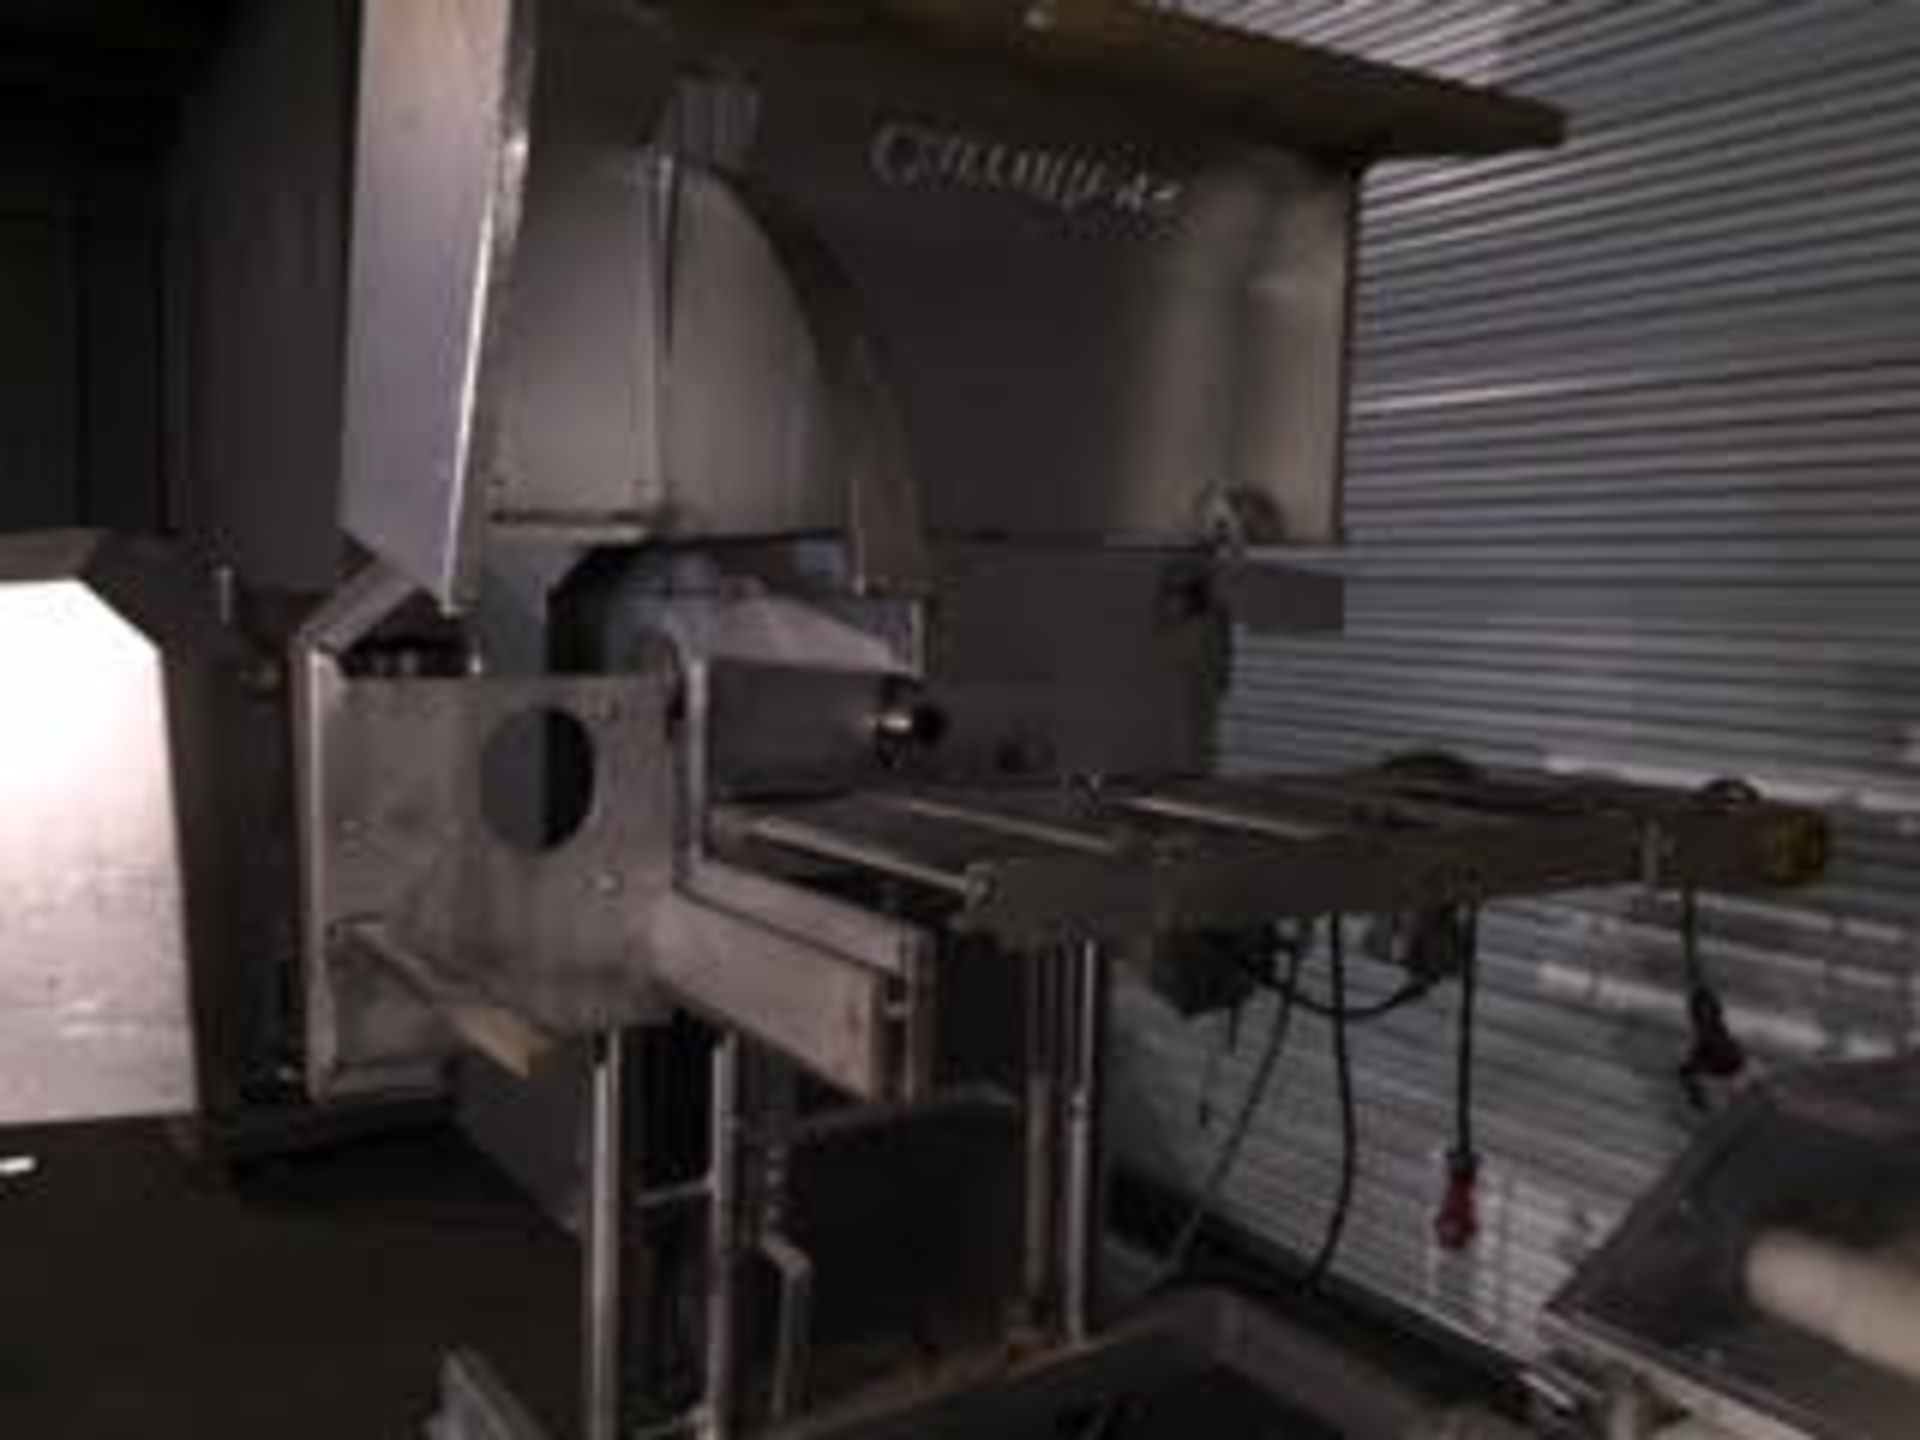 Partial Carruthers Slicer, Model 50002, Serial # 50225R20